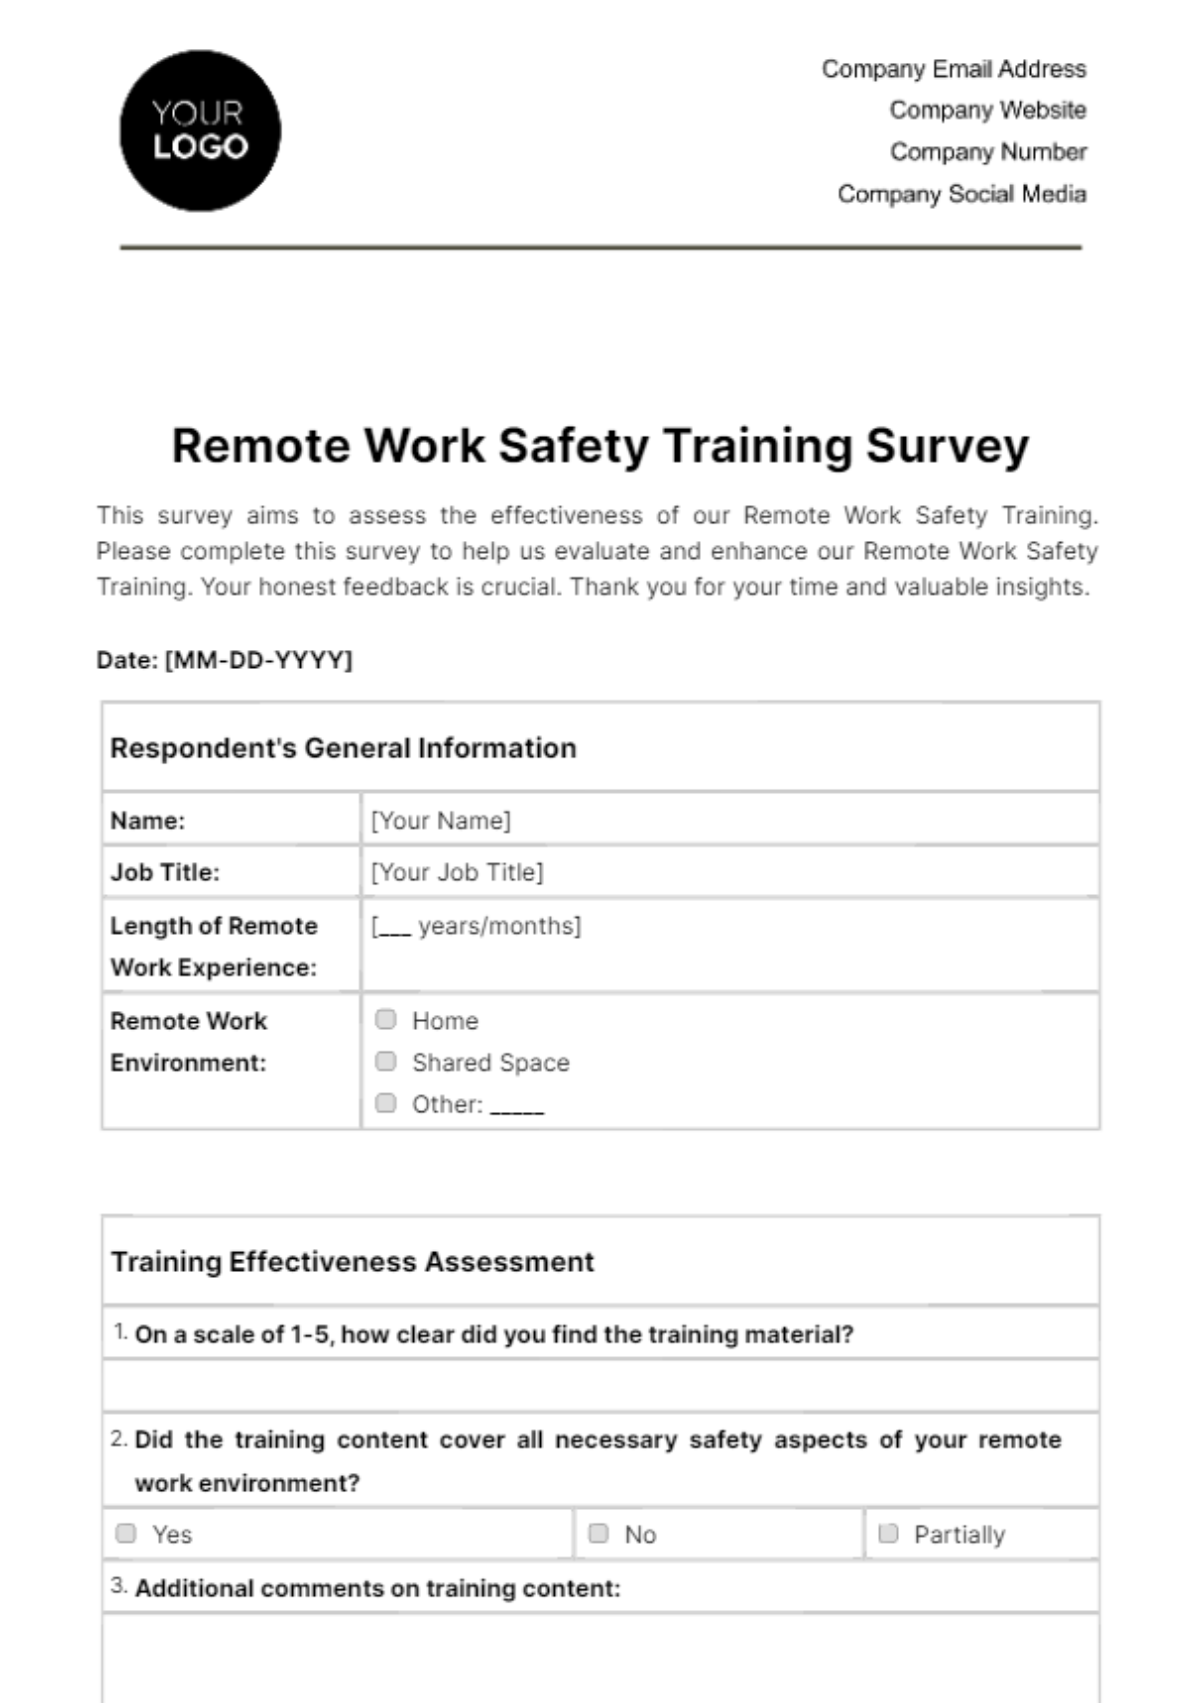 Remote Work Safety Training Survey Template